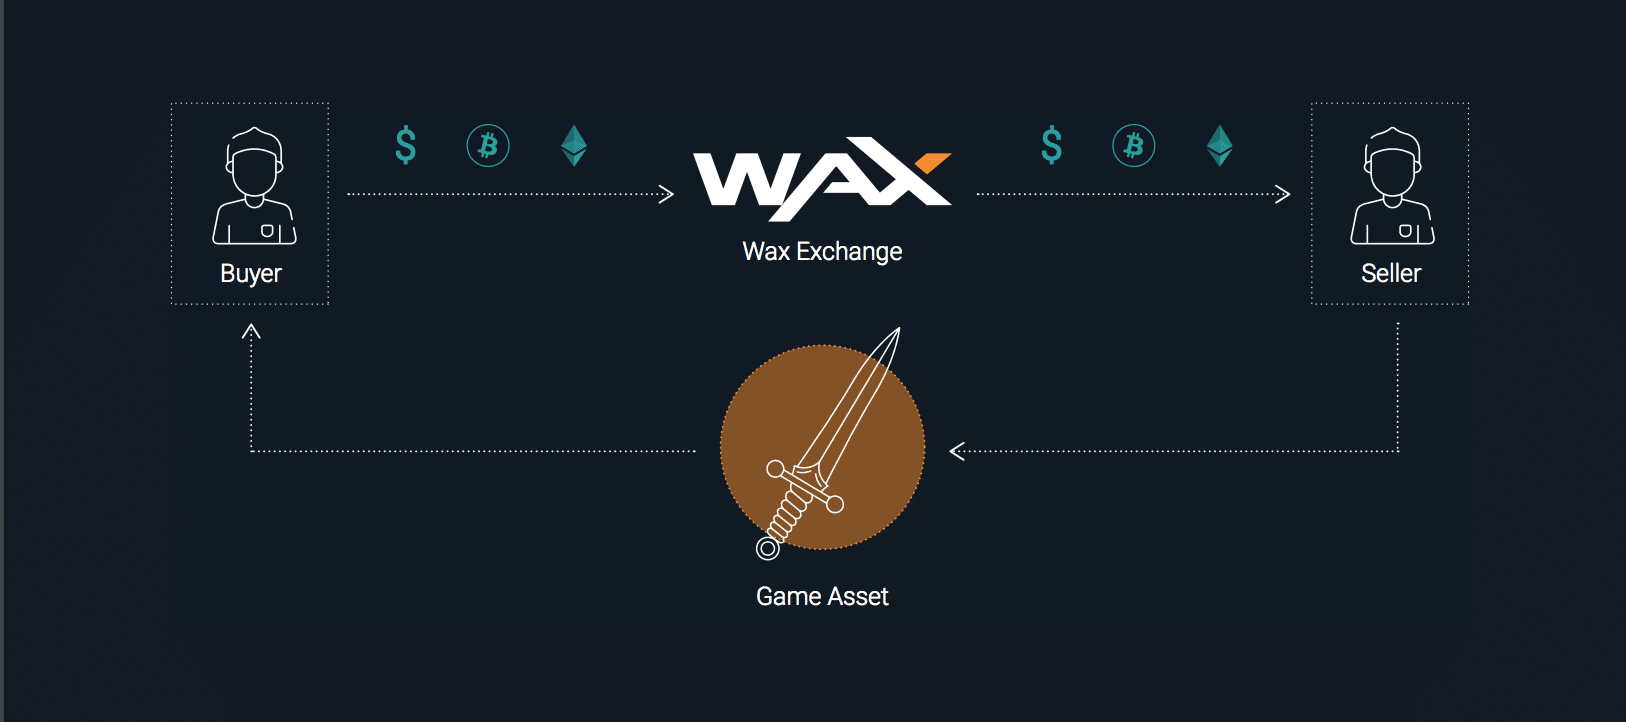 WAX Price | WAXP Price and Live Chart - CoinDesk